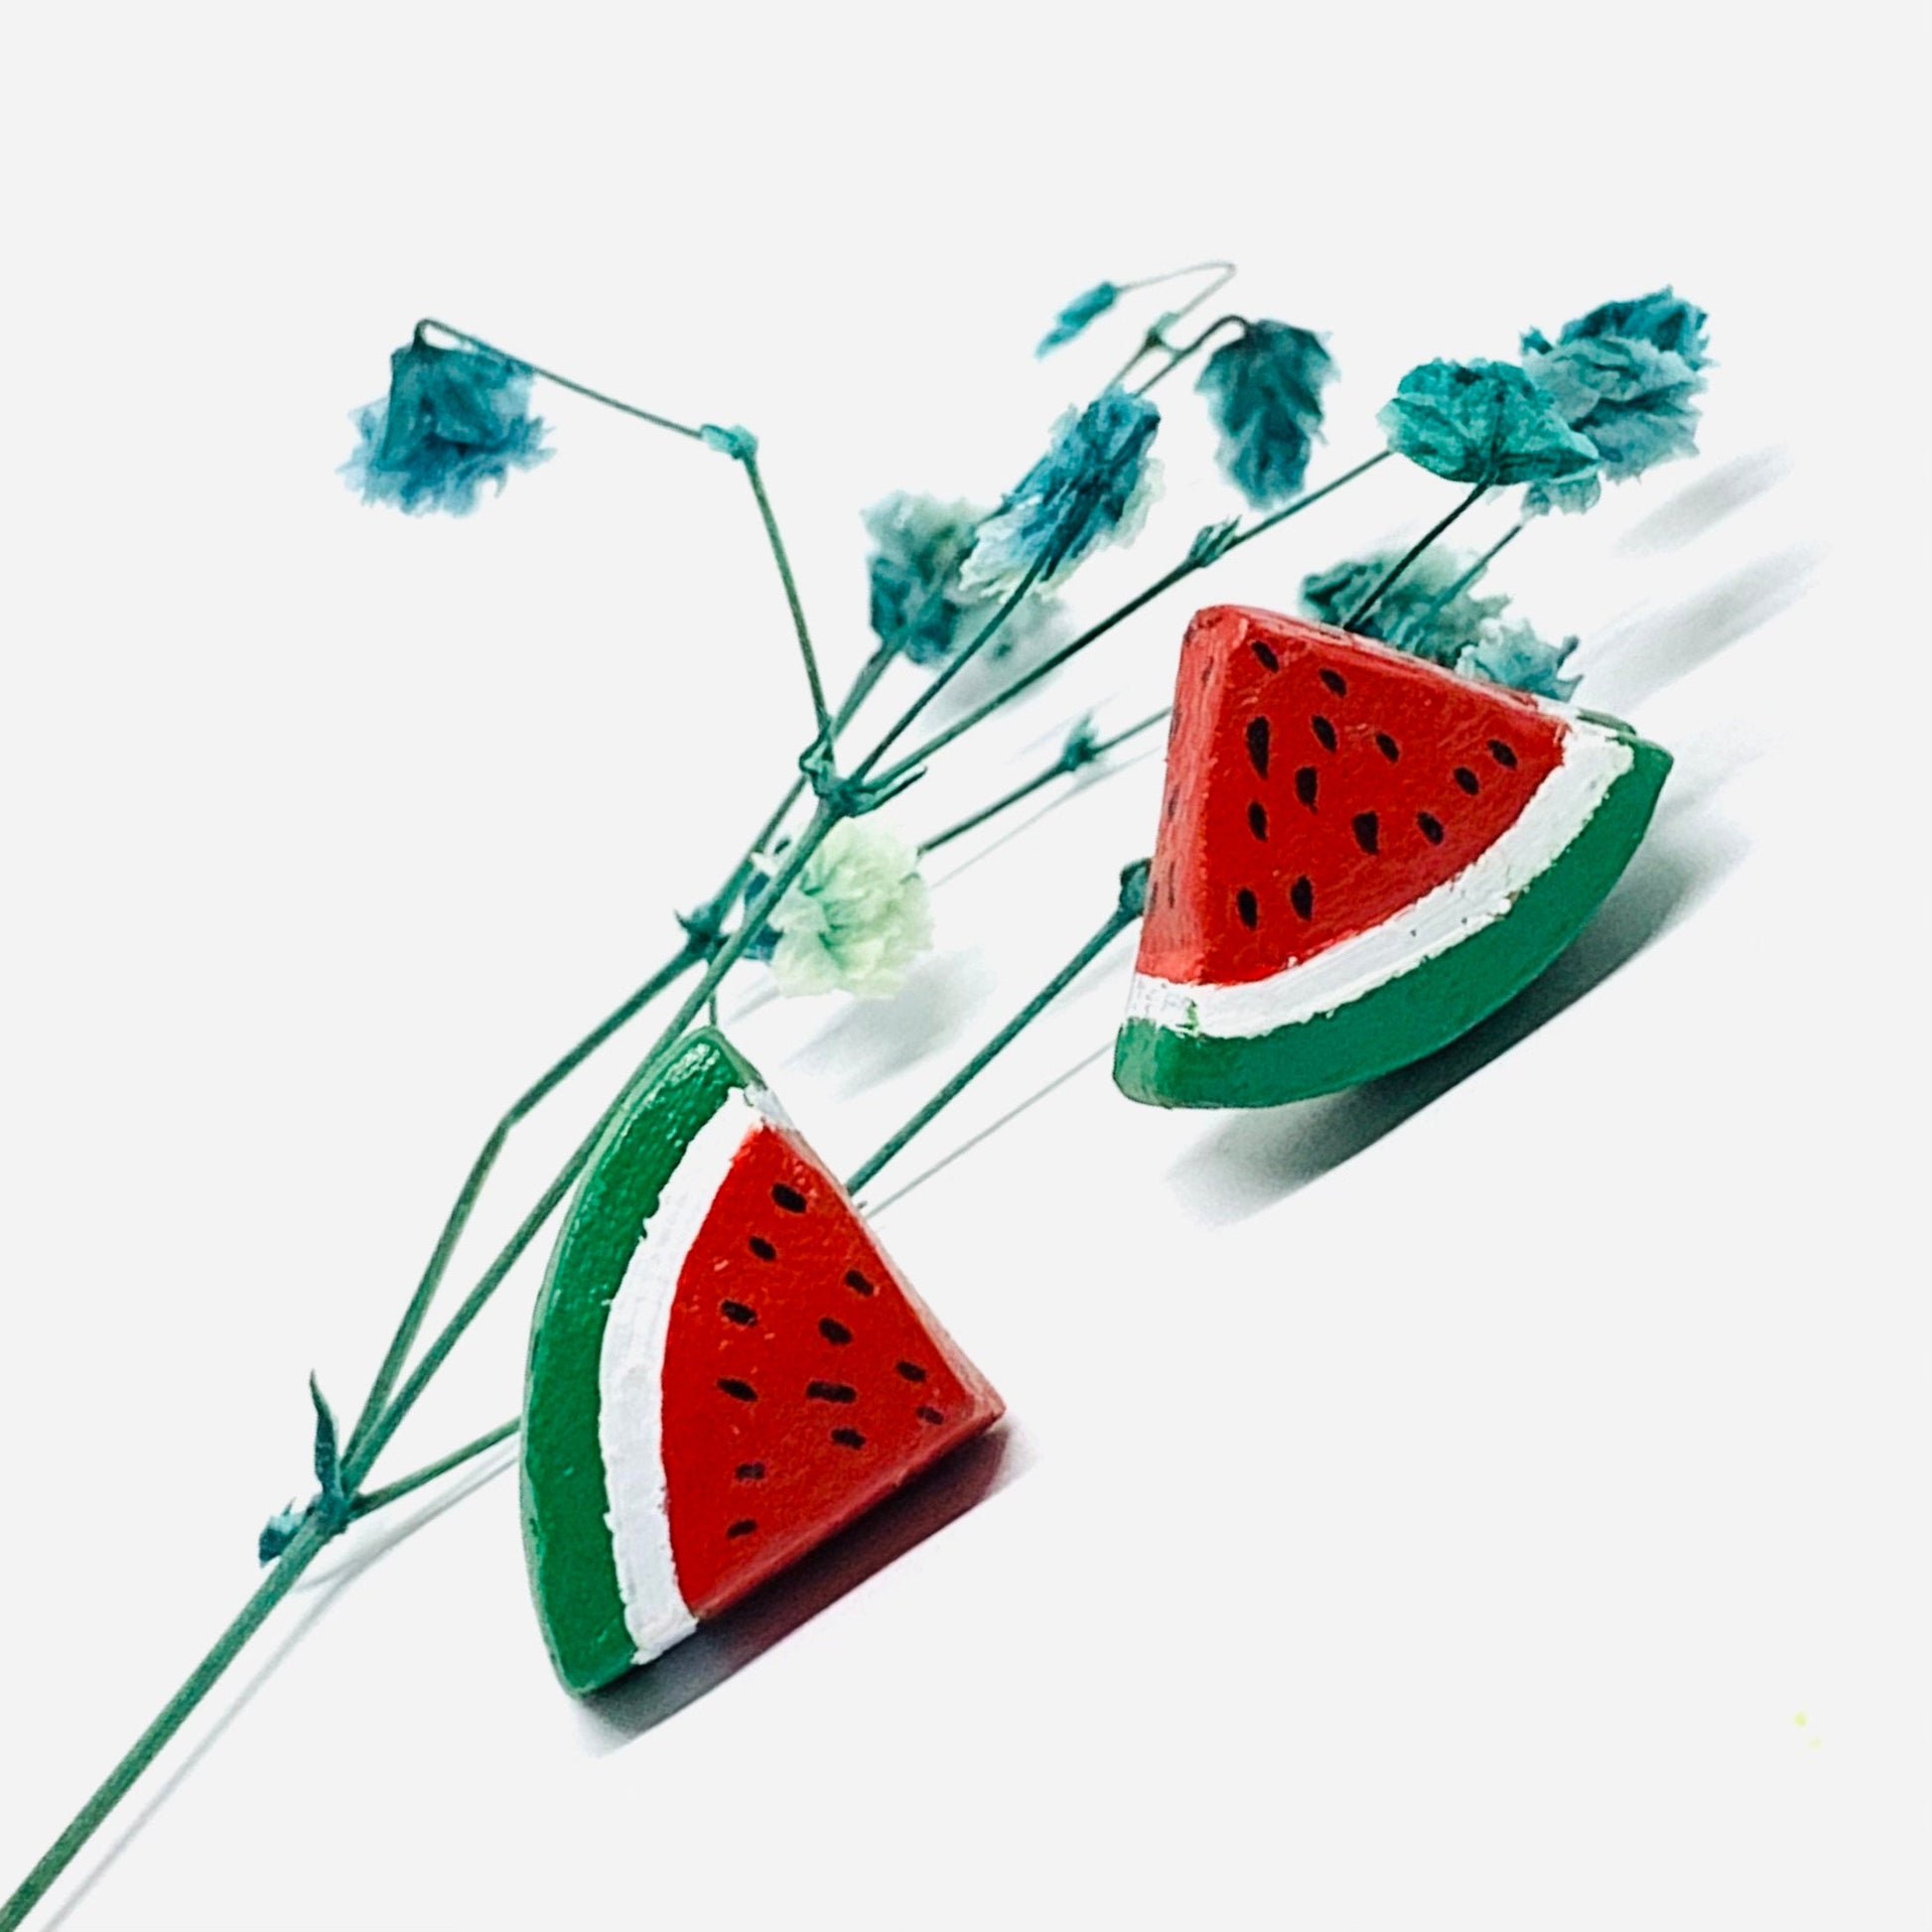 Watermelon Fruit Earrings Clay Jewelry Mexico Colors Summer Fashion Girls Women Studs Wearable ArtToWear Gift Aretes Sandia Mujer Claywelry